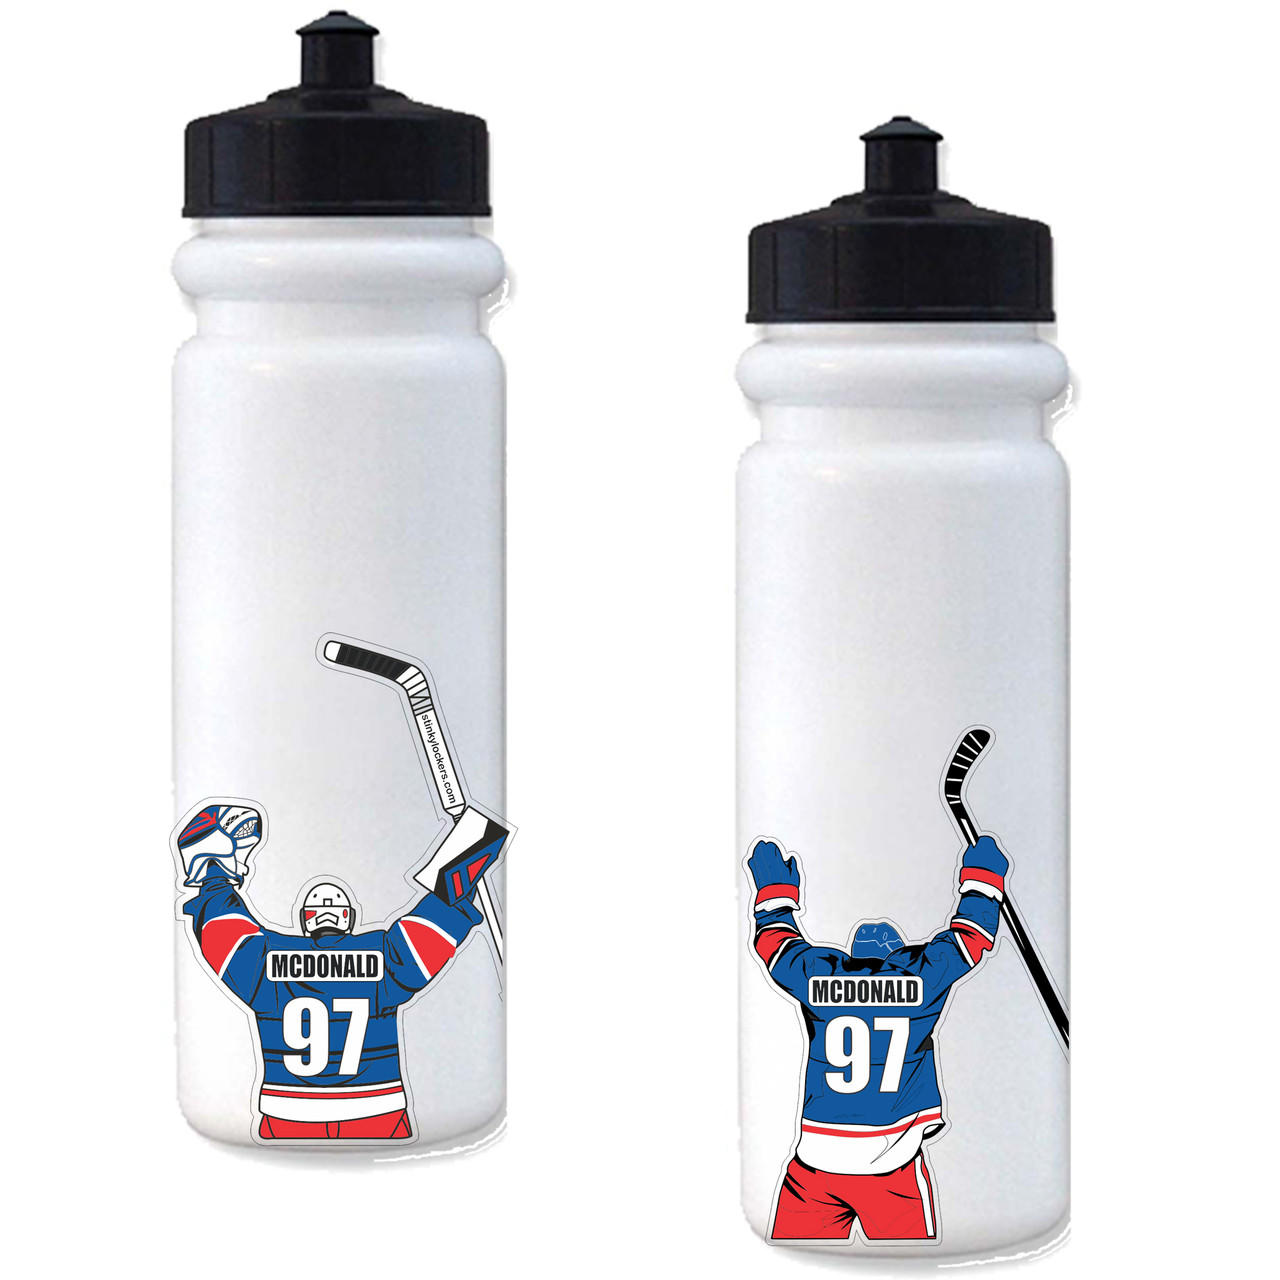 Personalized Hockey Sticker for your Water Bottle | Cell Phone | Laptop | Thermal Mug & More Questions & Answers